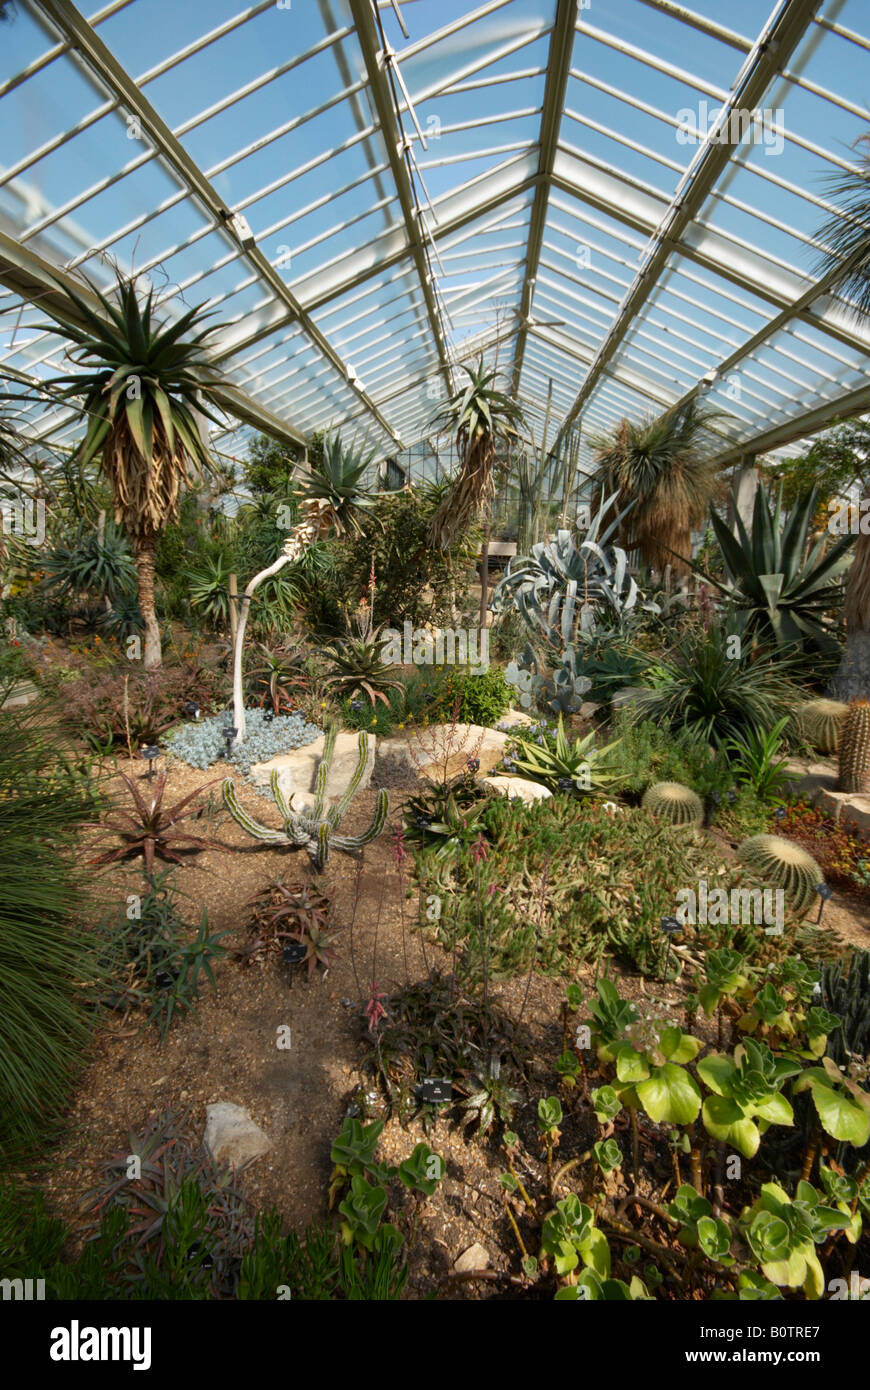 Princess of Wales conservatory Kew Gardens Banque D'Images